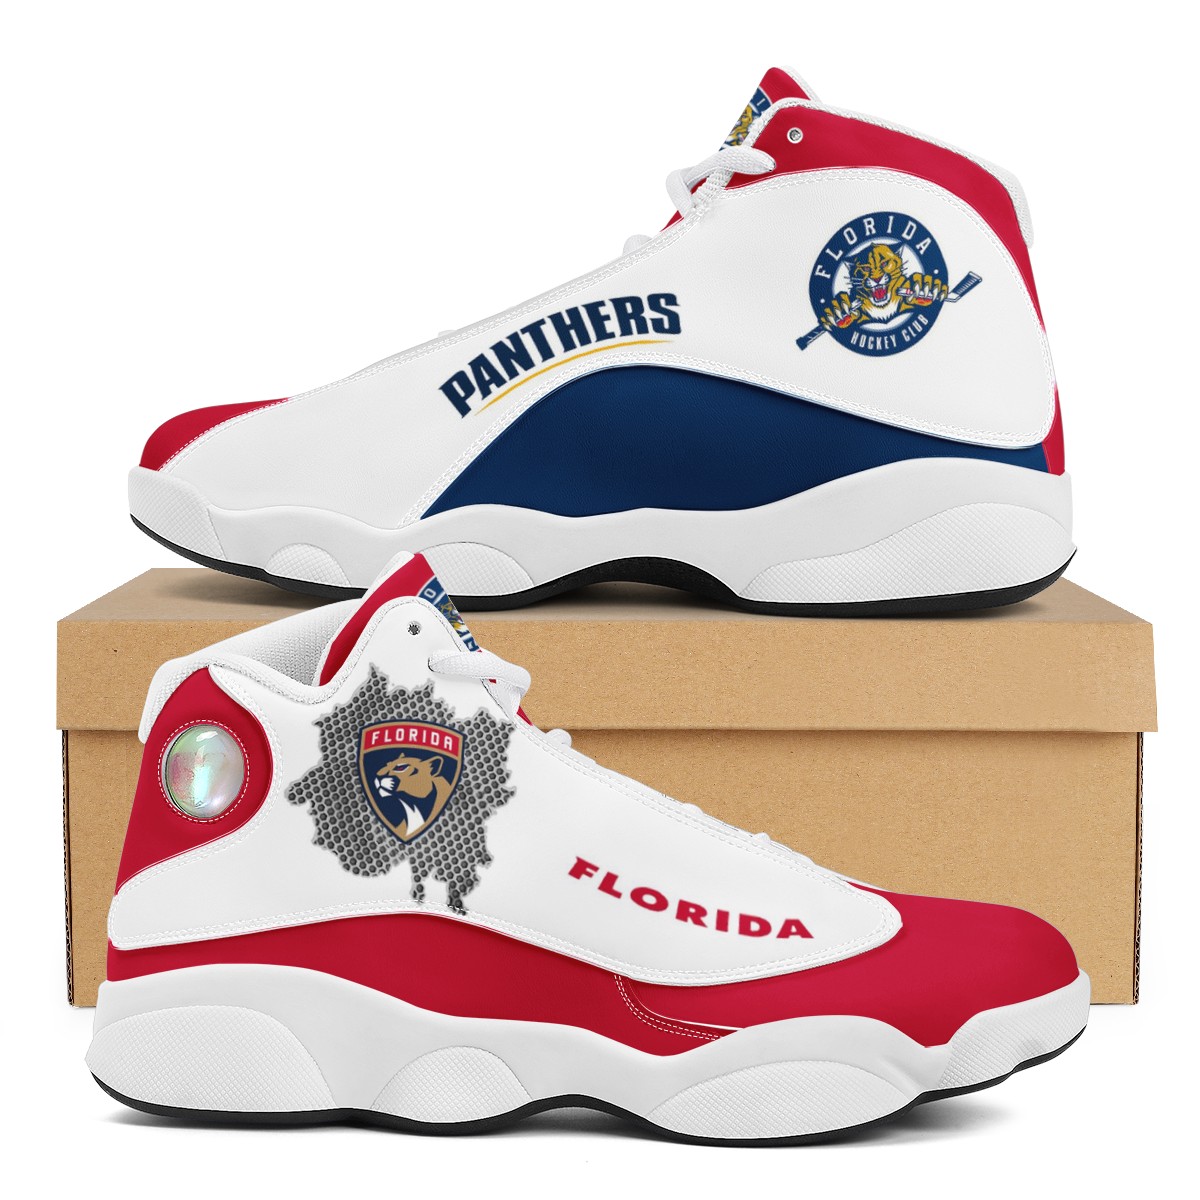 Men's Florida Panthers Limited Edition JD13 Sneakers 001